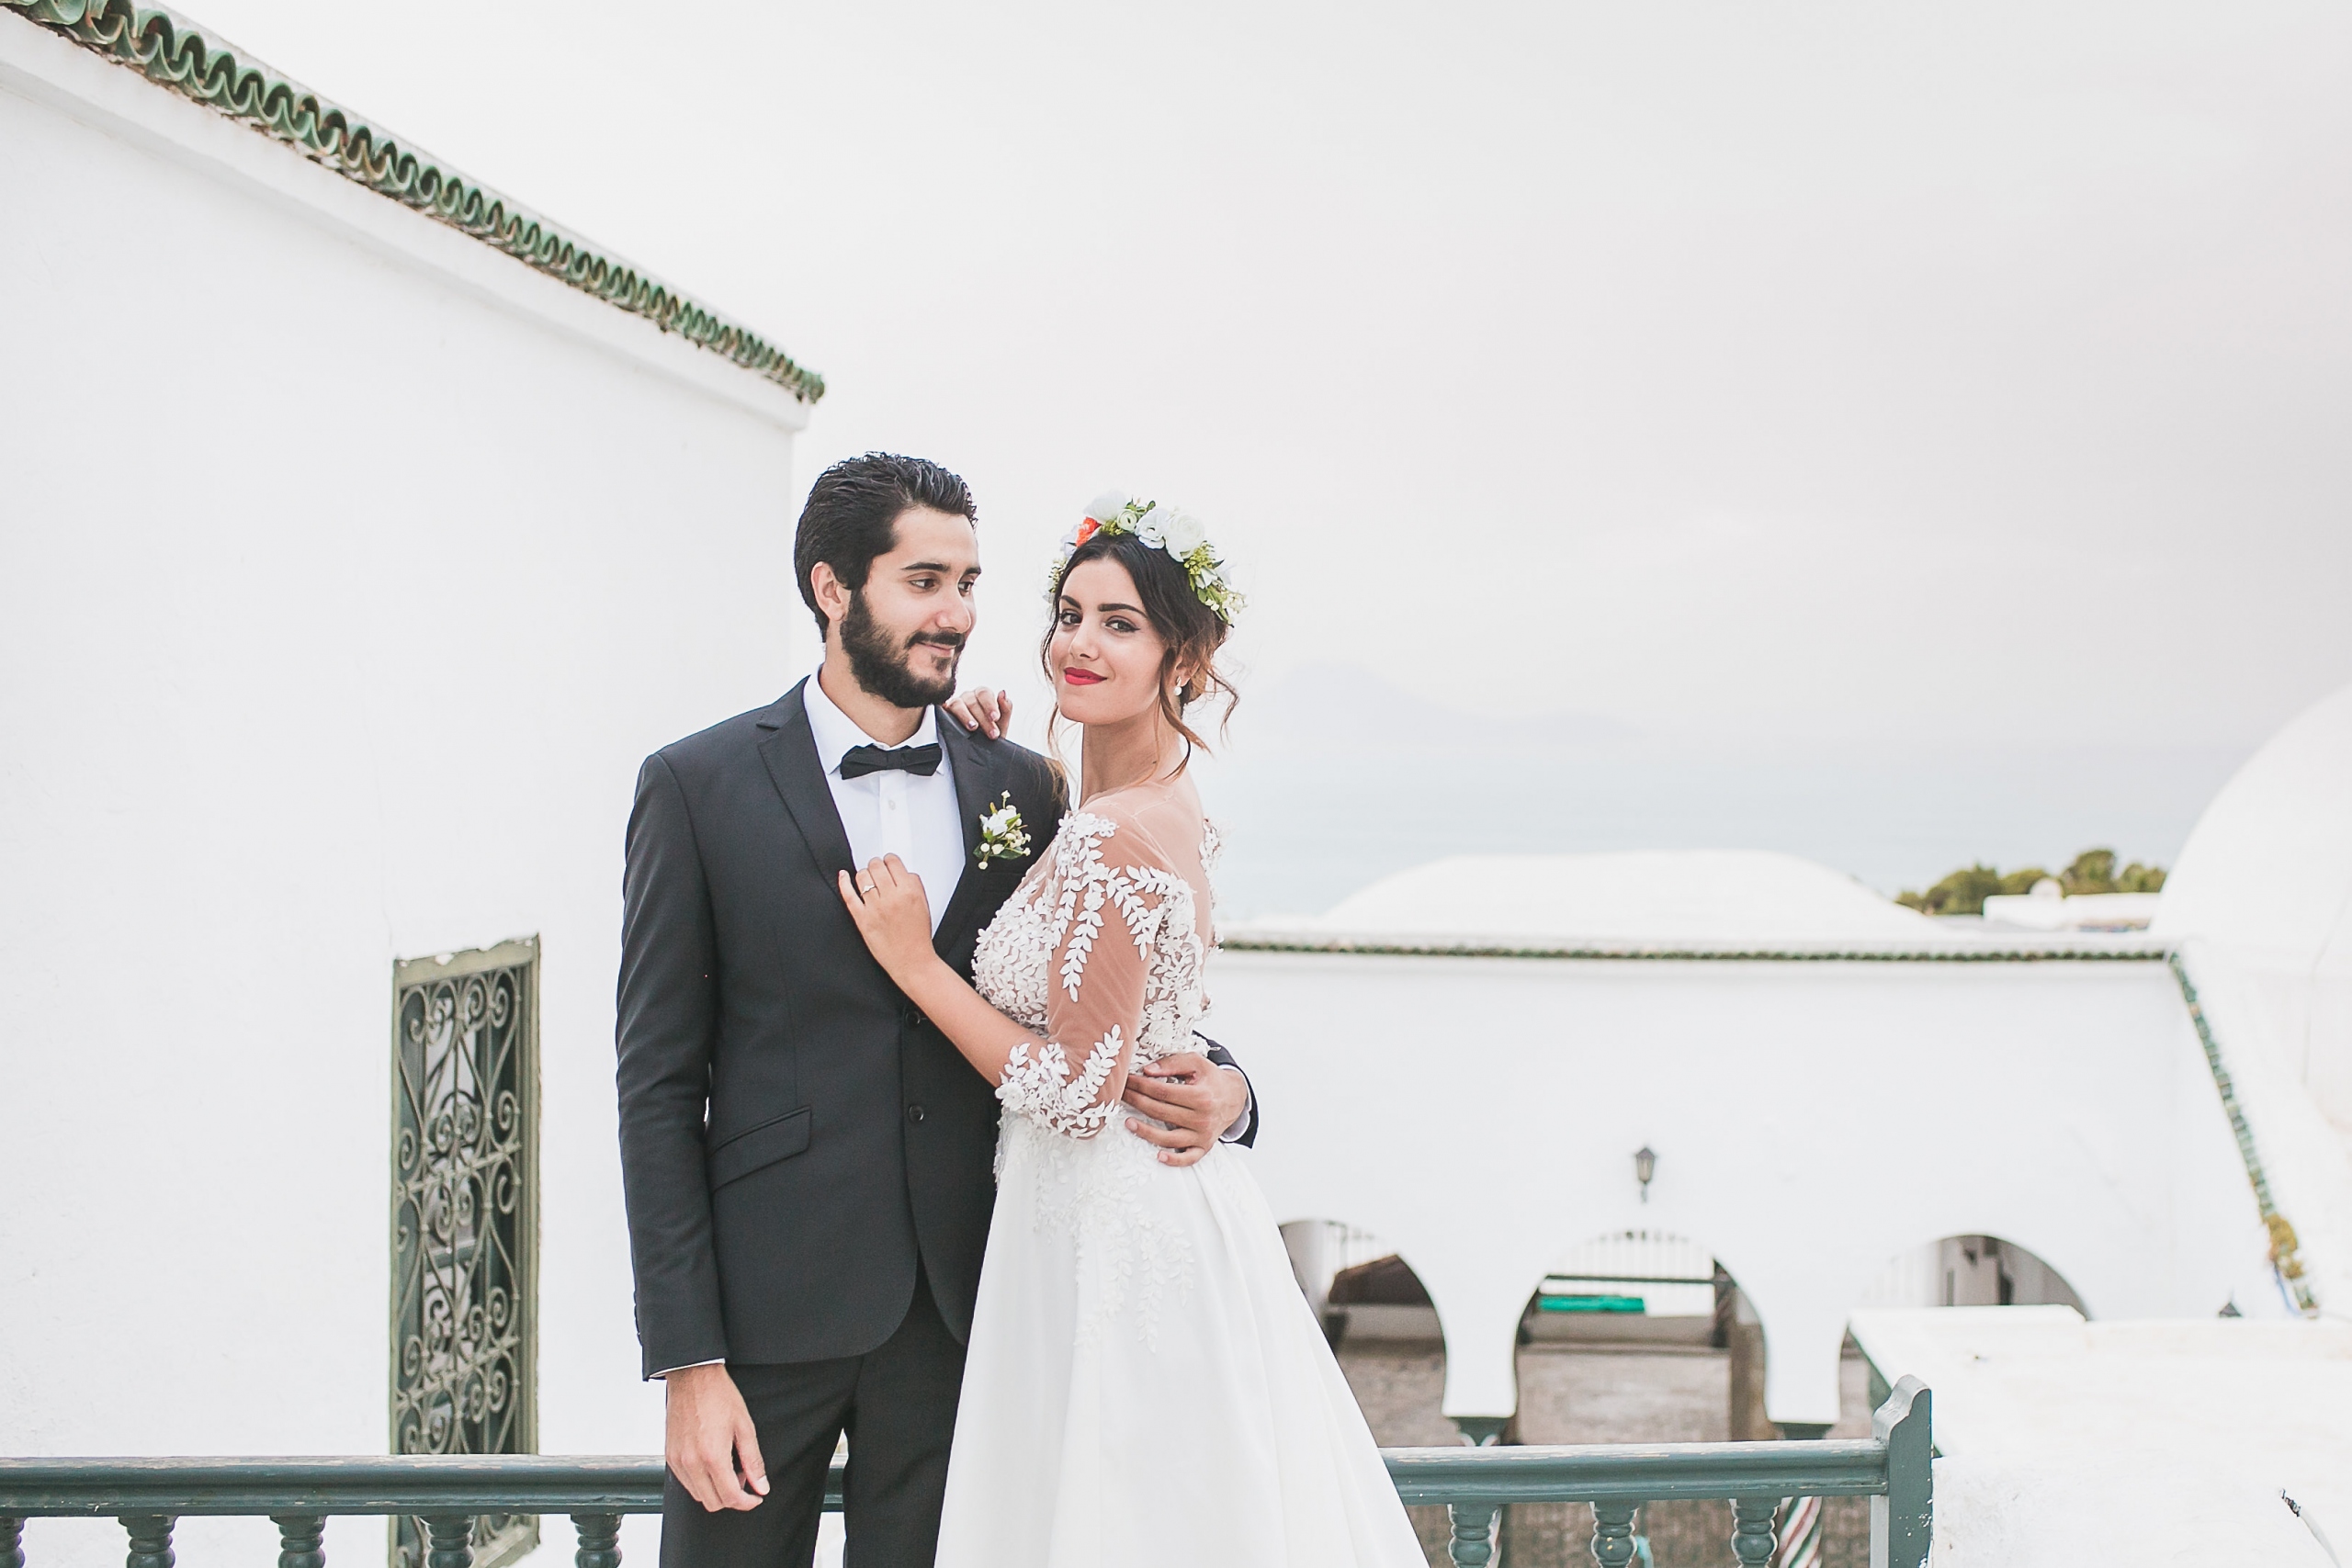 Mediterranean Meets Africa; Colorful Tunisian Wedding Inspiration | Ness Photography 5